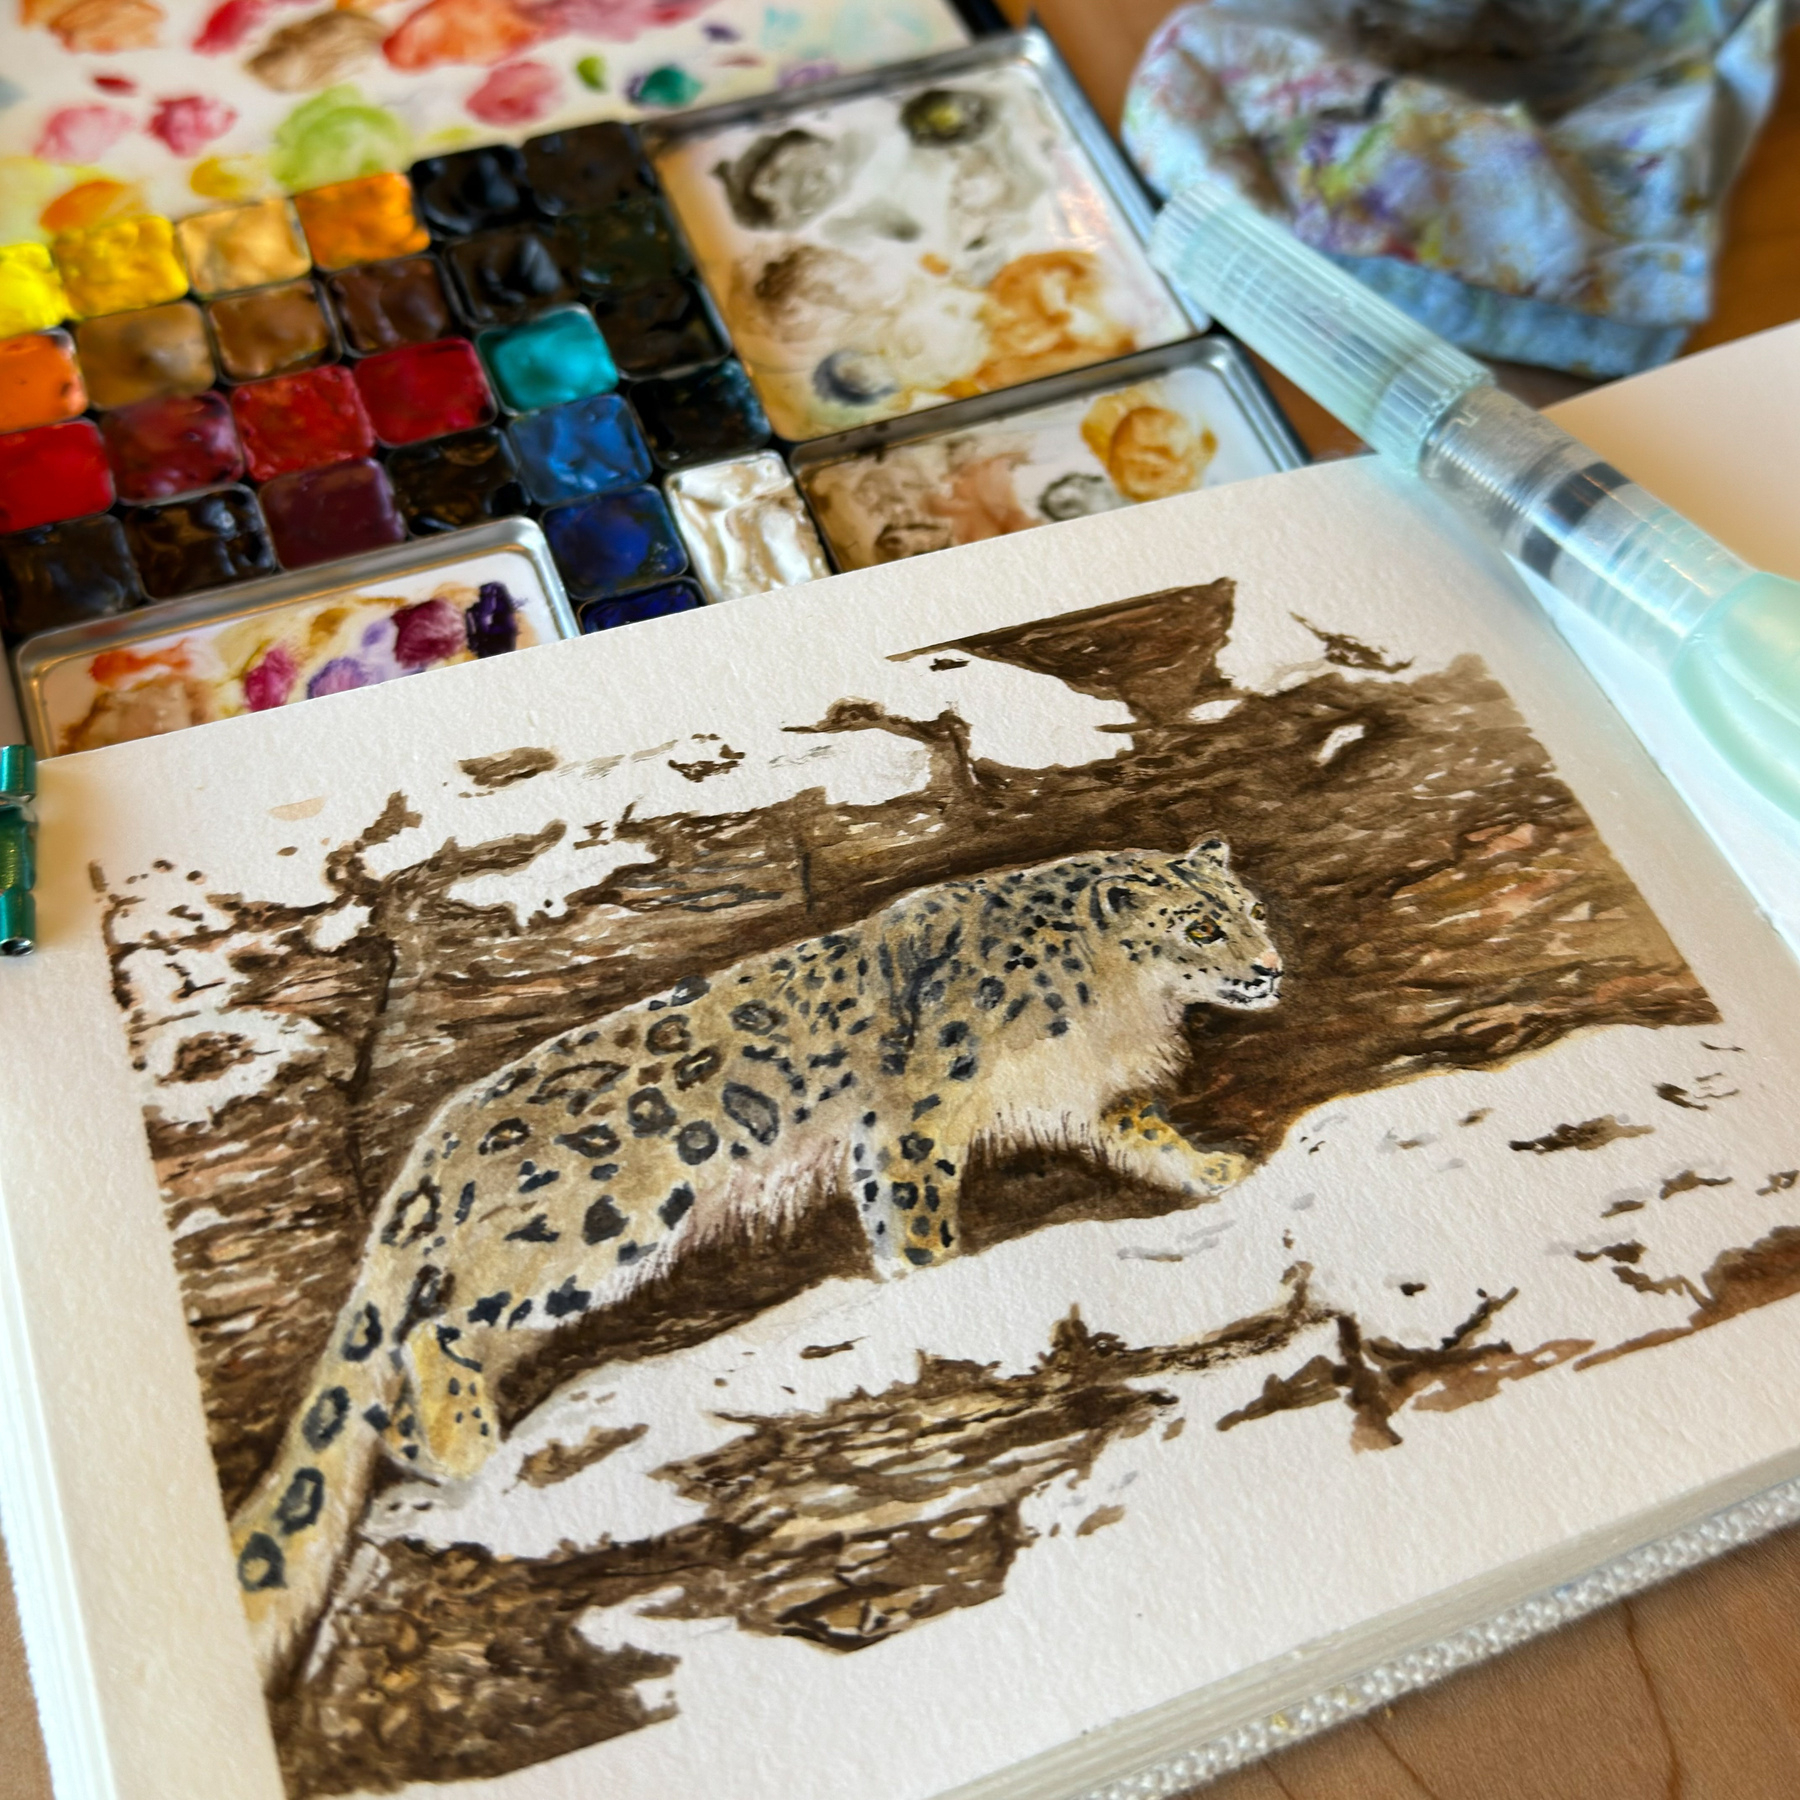 A watercolor painting in a sketchbook depicting a snow leopard with intricate spot patterns crouched on a rocky terrain, accompanied by a watercolor palette with vibrant hues and a used rag on a wooden surface.